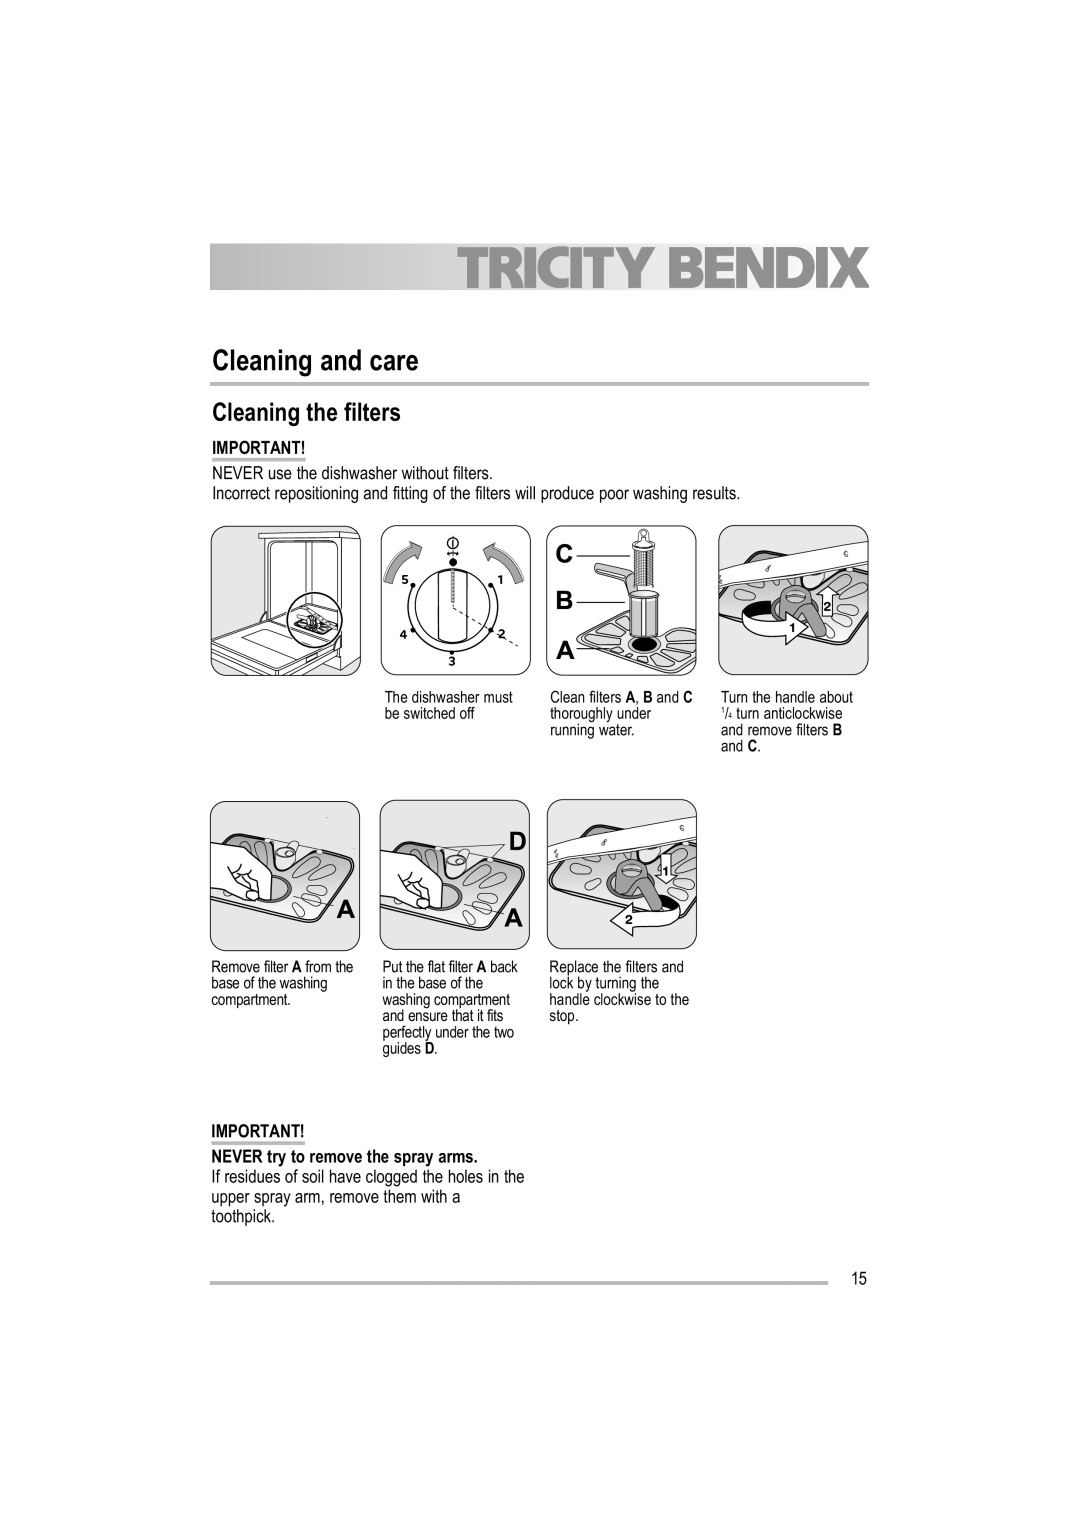 Tricity Bendix TDF 221 manual Cleaning and care, Cleaning the filters, NEVER try to remove the spray arms 